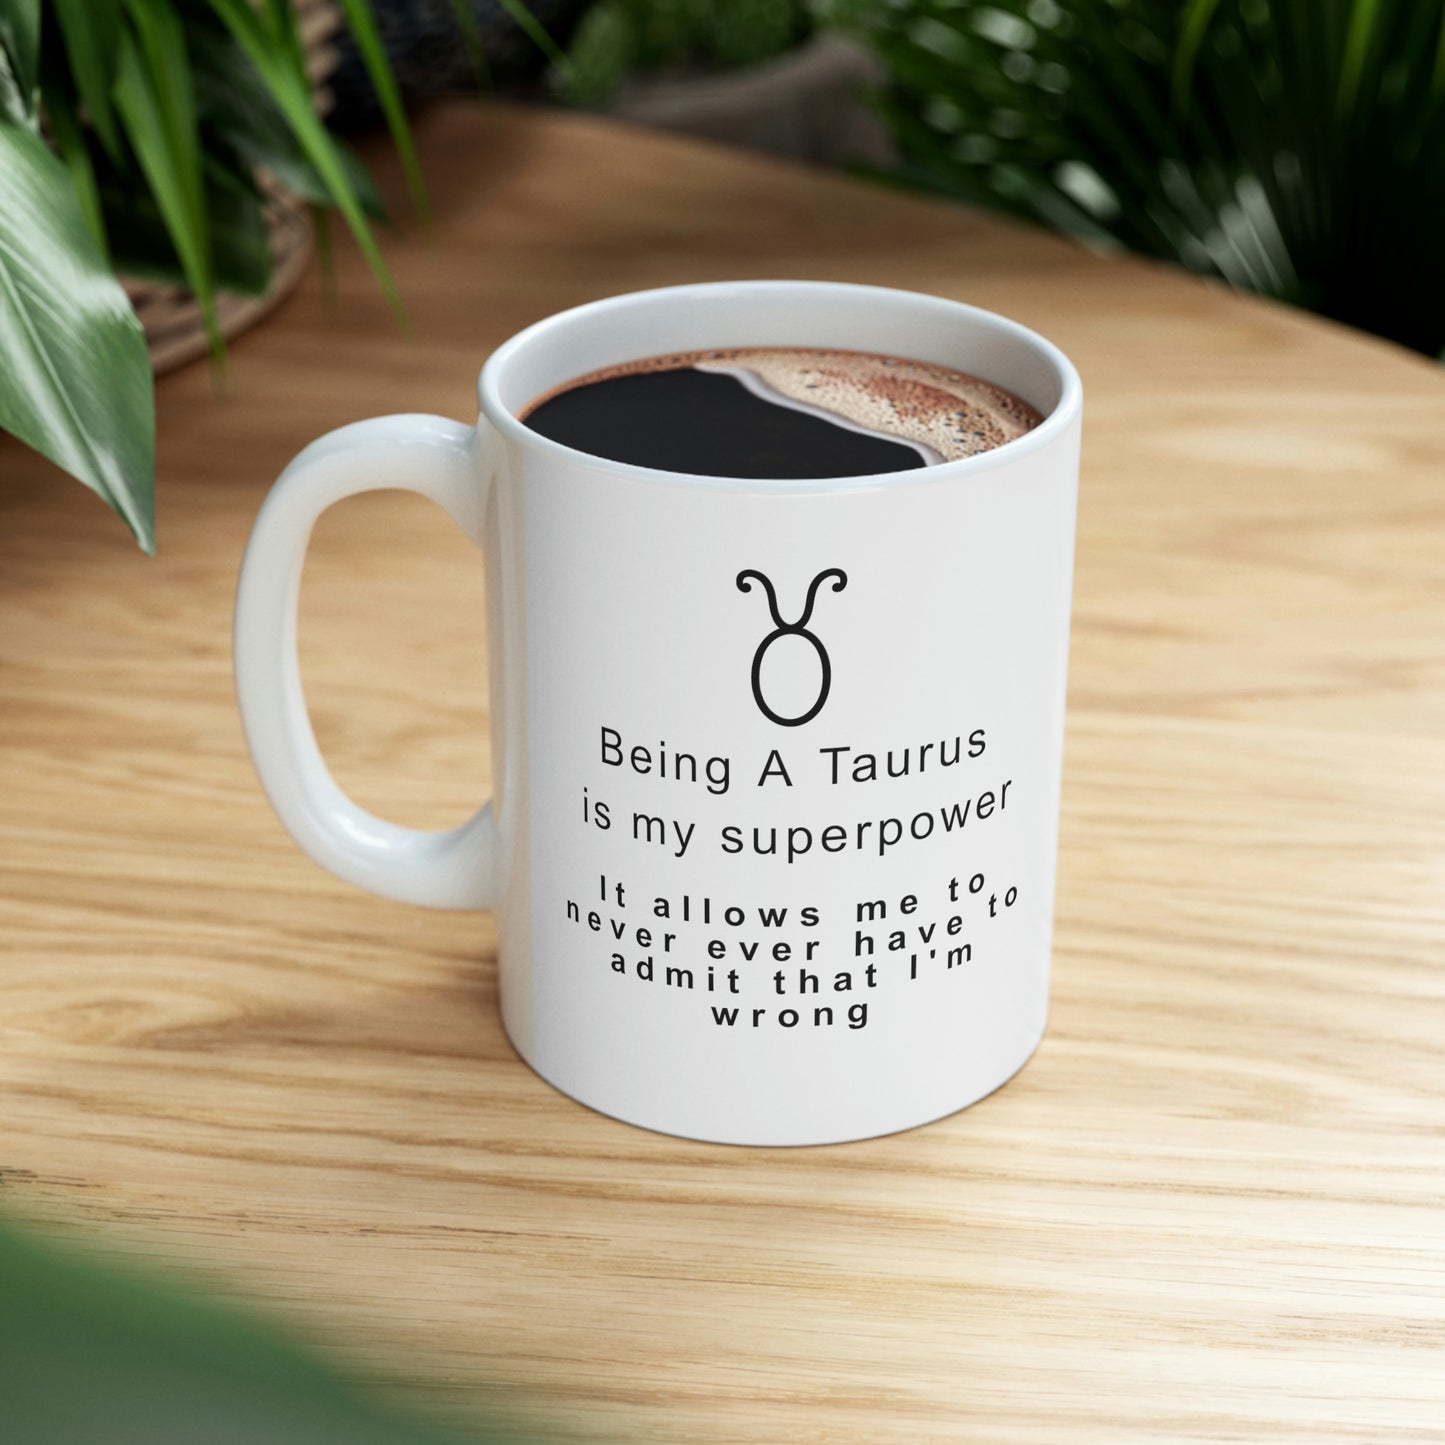 Taurus Mug: Being a Taurus is my superpower -It allows me to never ever have to admit that I'm wrong